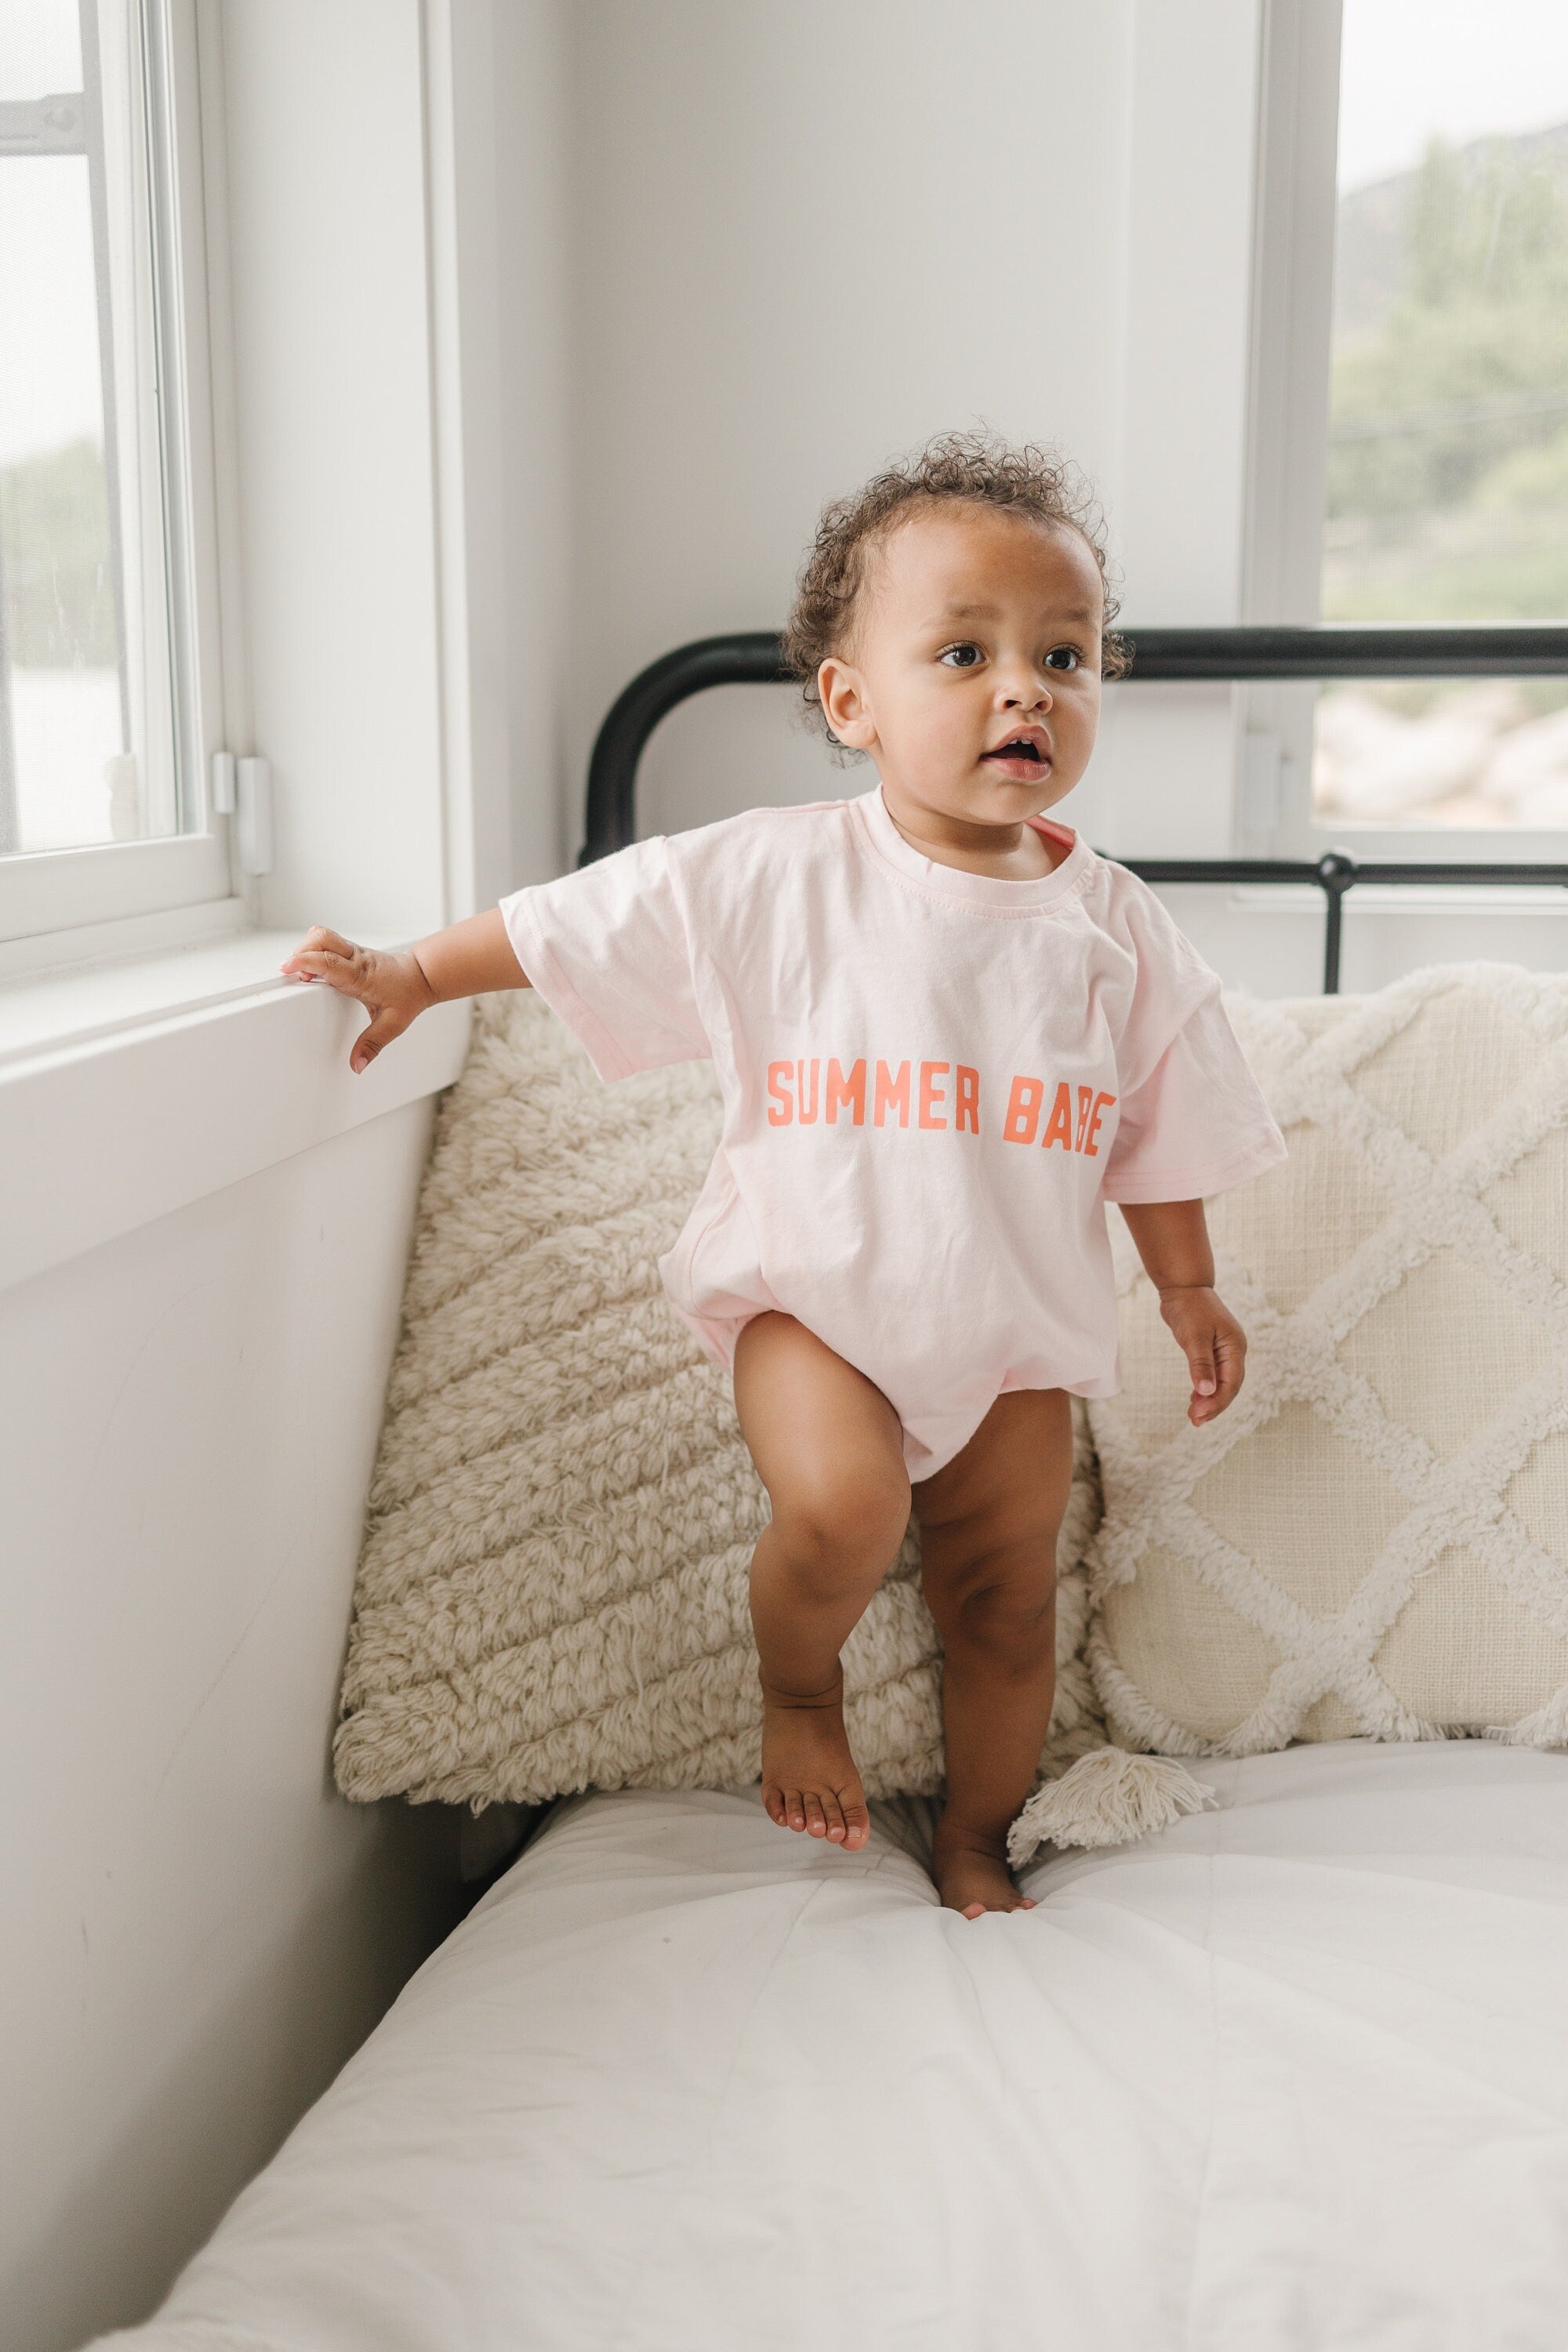 SUMMER BABE Oversized T-Shirt Romper - Baby Girl Bubble Romper - Baby Girl Outfit - Beach Ocean Summer Clothes